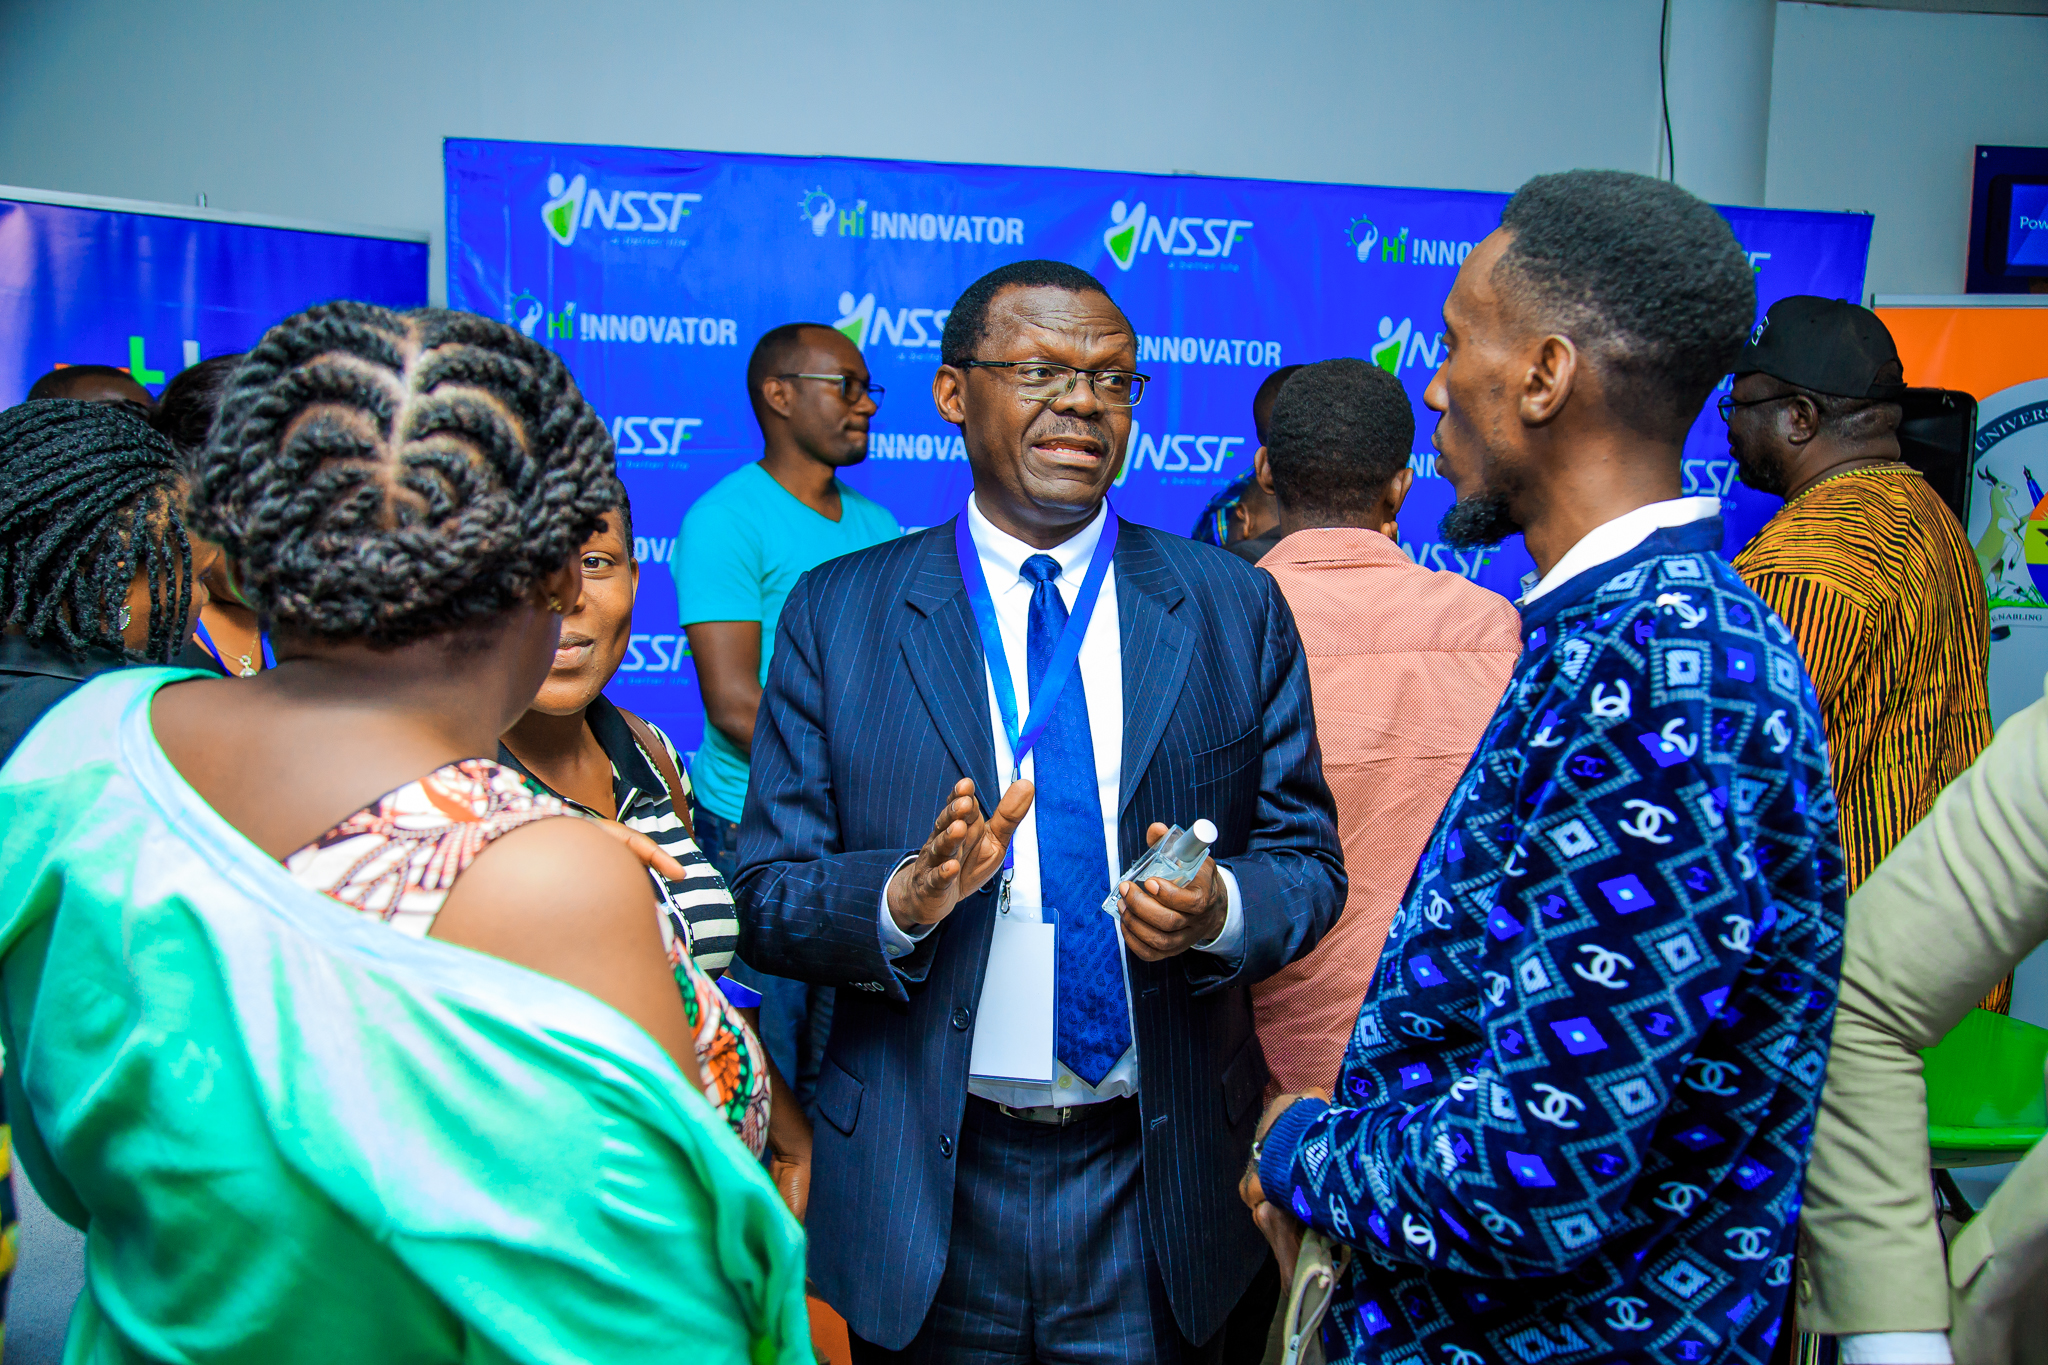 NSSF Deputy Managing Director, Patrick Ayota, speaking to some of the small business owners during an information session on the programme held at Outbox.